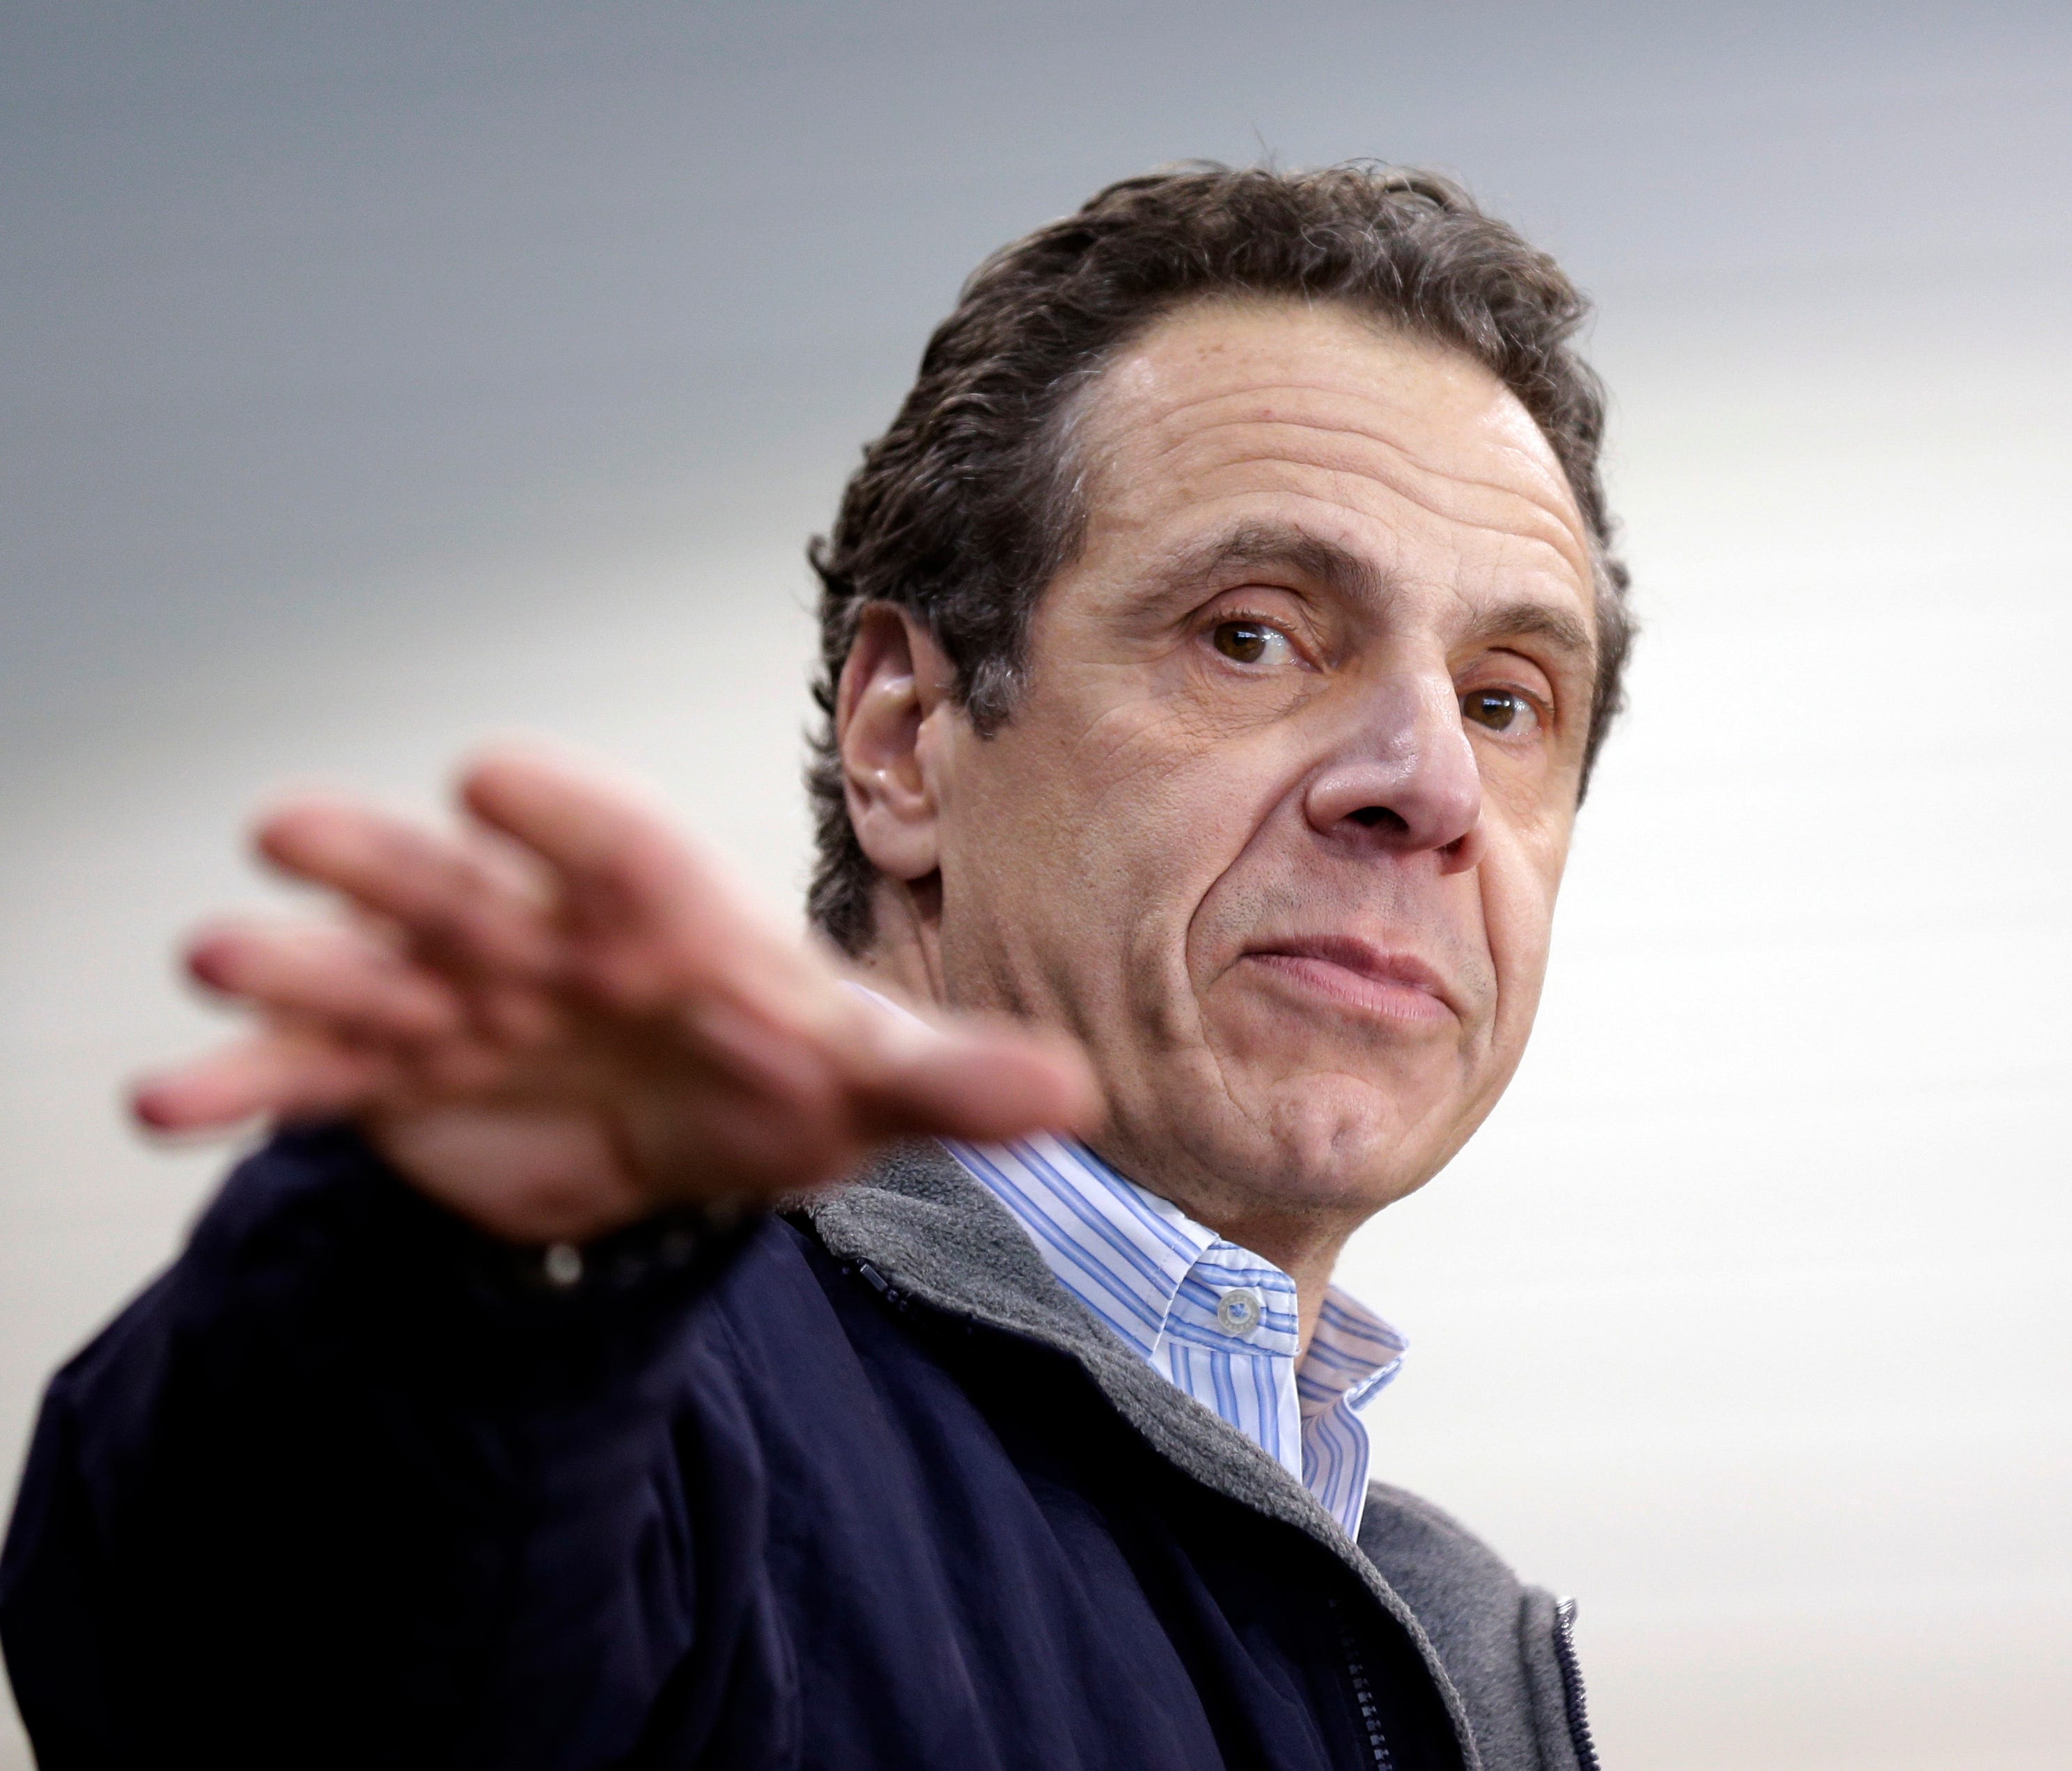 New York Governor Andrew Cuomo speaks at an event in New York, Monday, April 2, 2018. Cuomo was touting the funds in the new state budget to help fix decrepit public housing in New York City. (AP Photo/Seth Wenig)